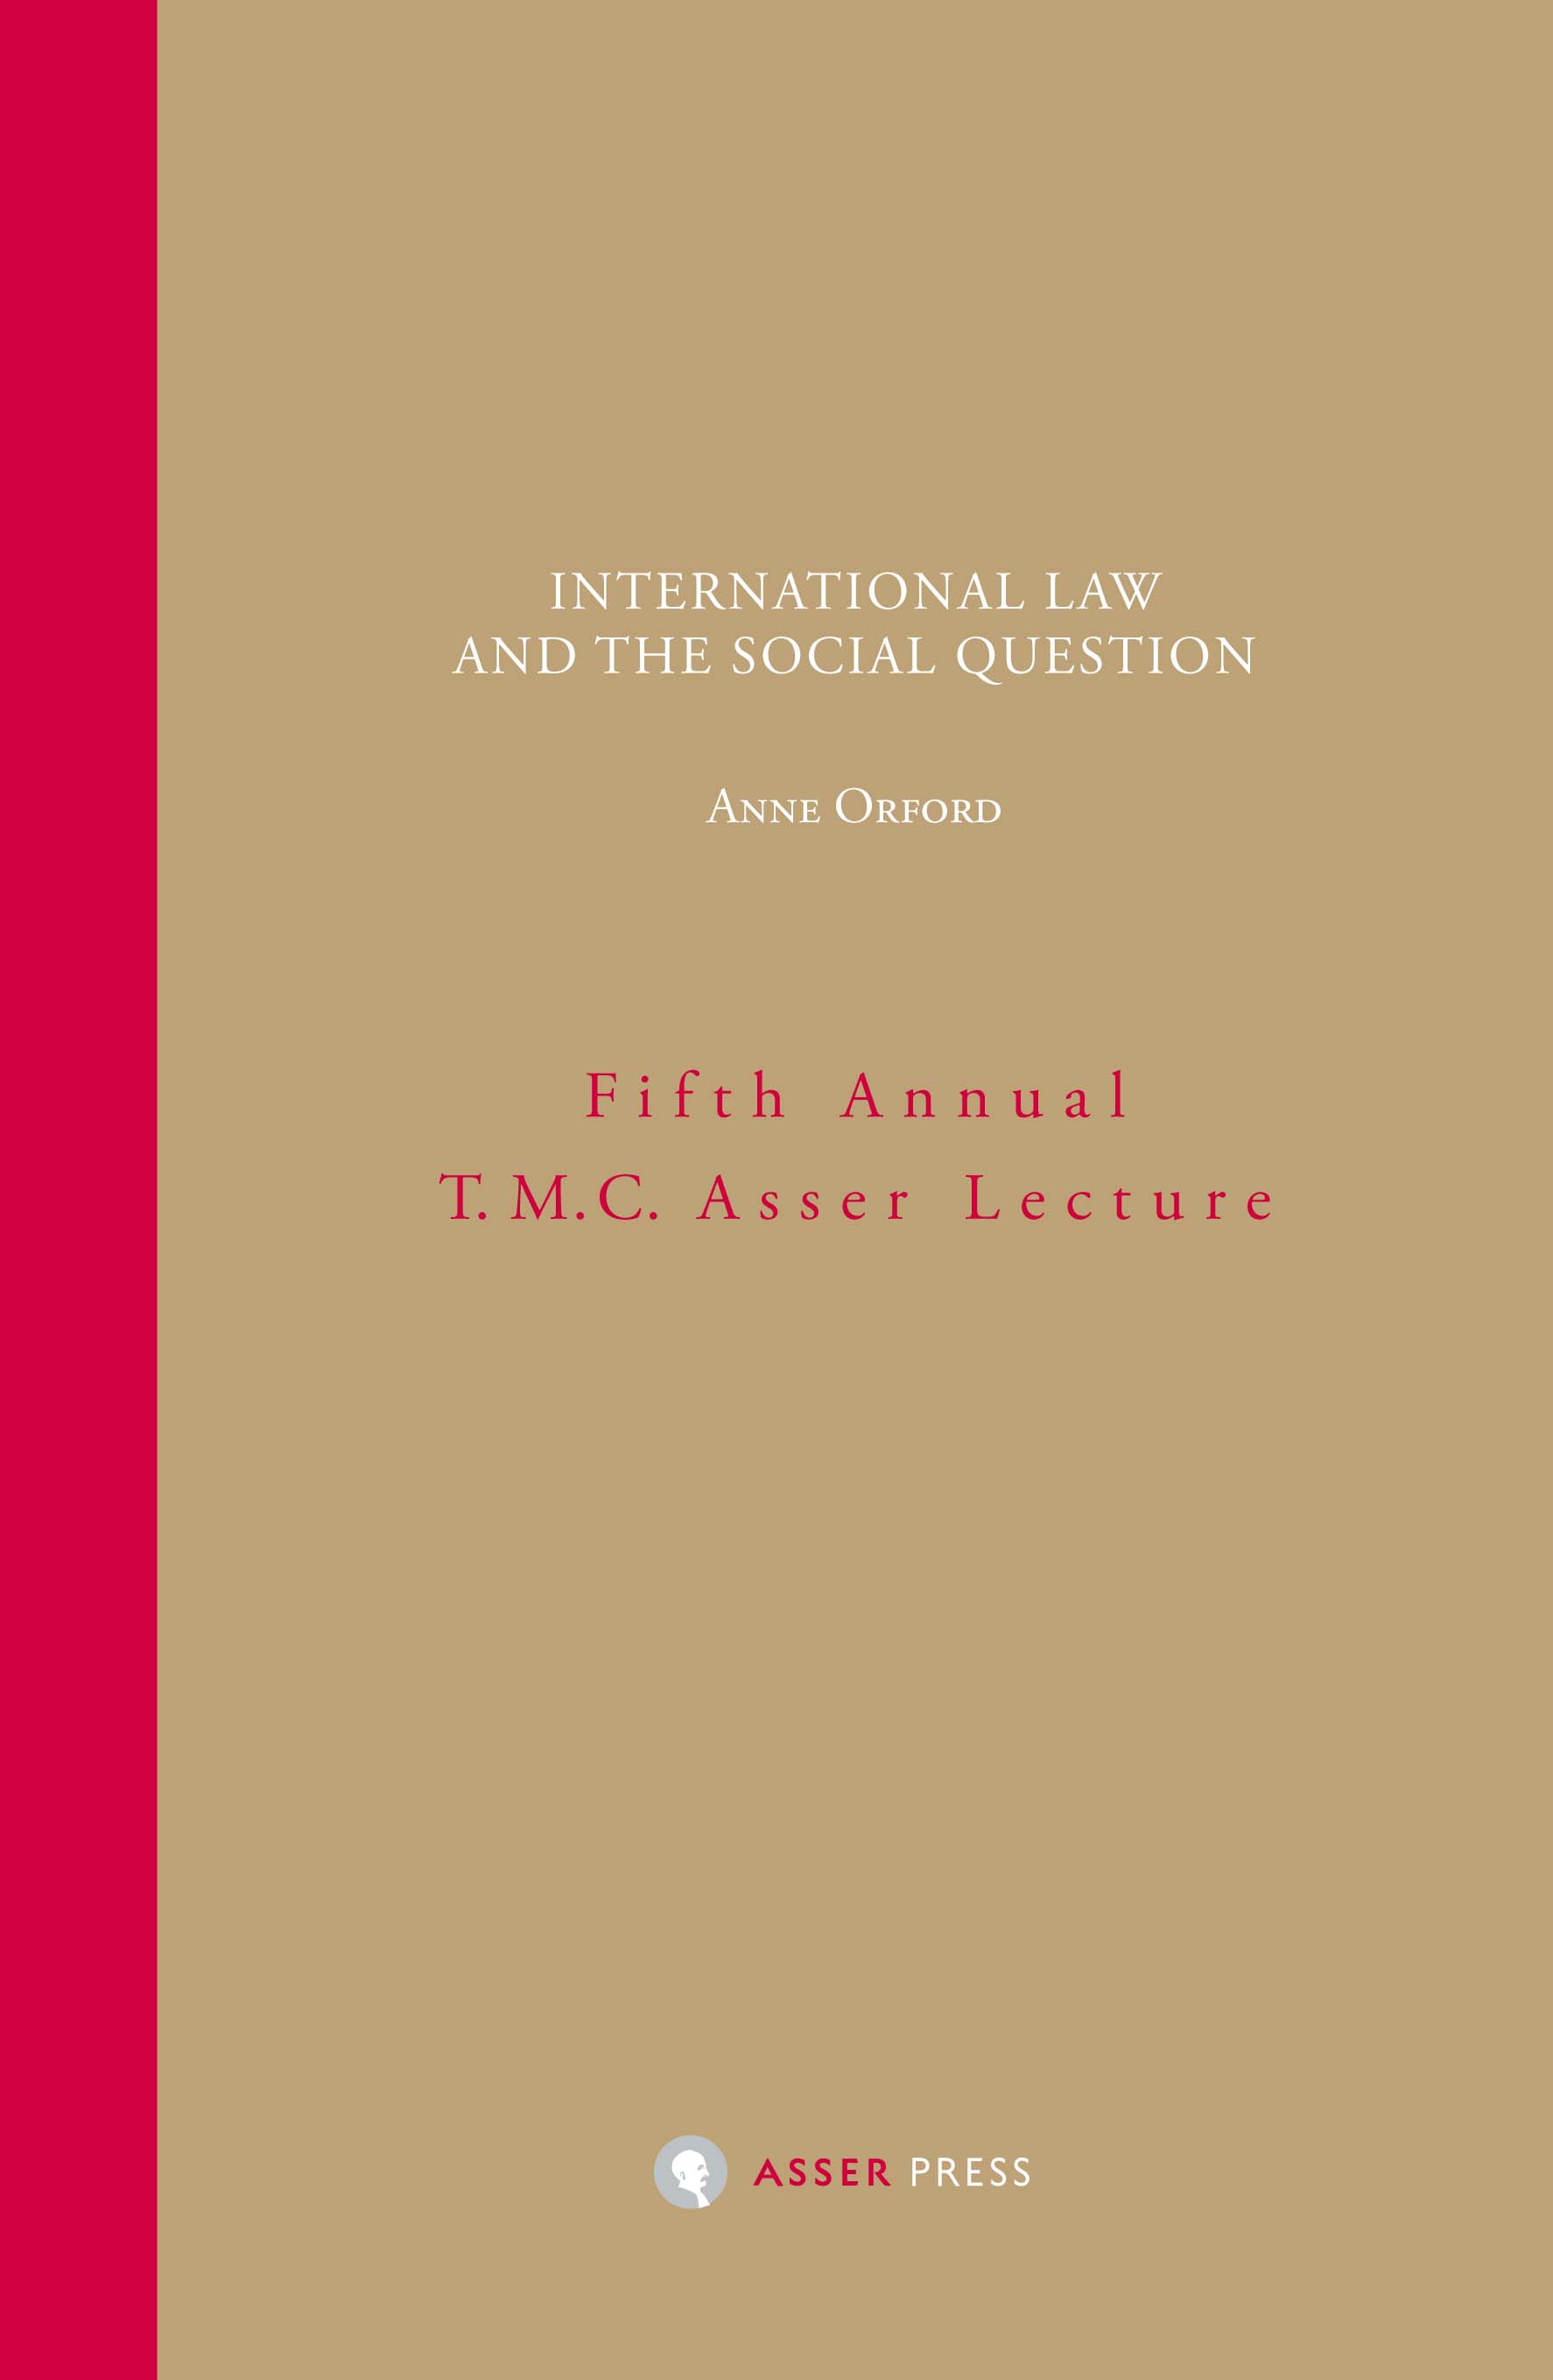 International Law and the Social Question - Fifth Annual T.M.C. Asser Lecture